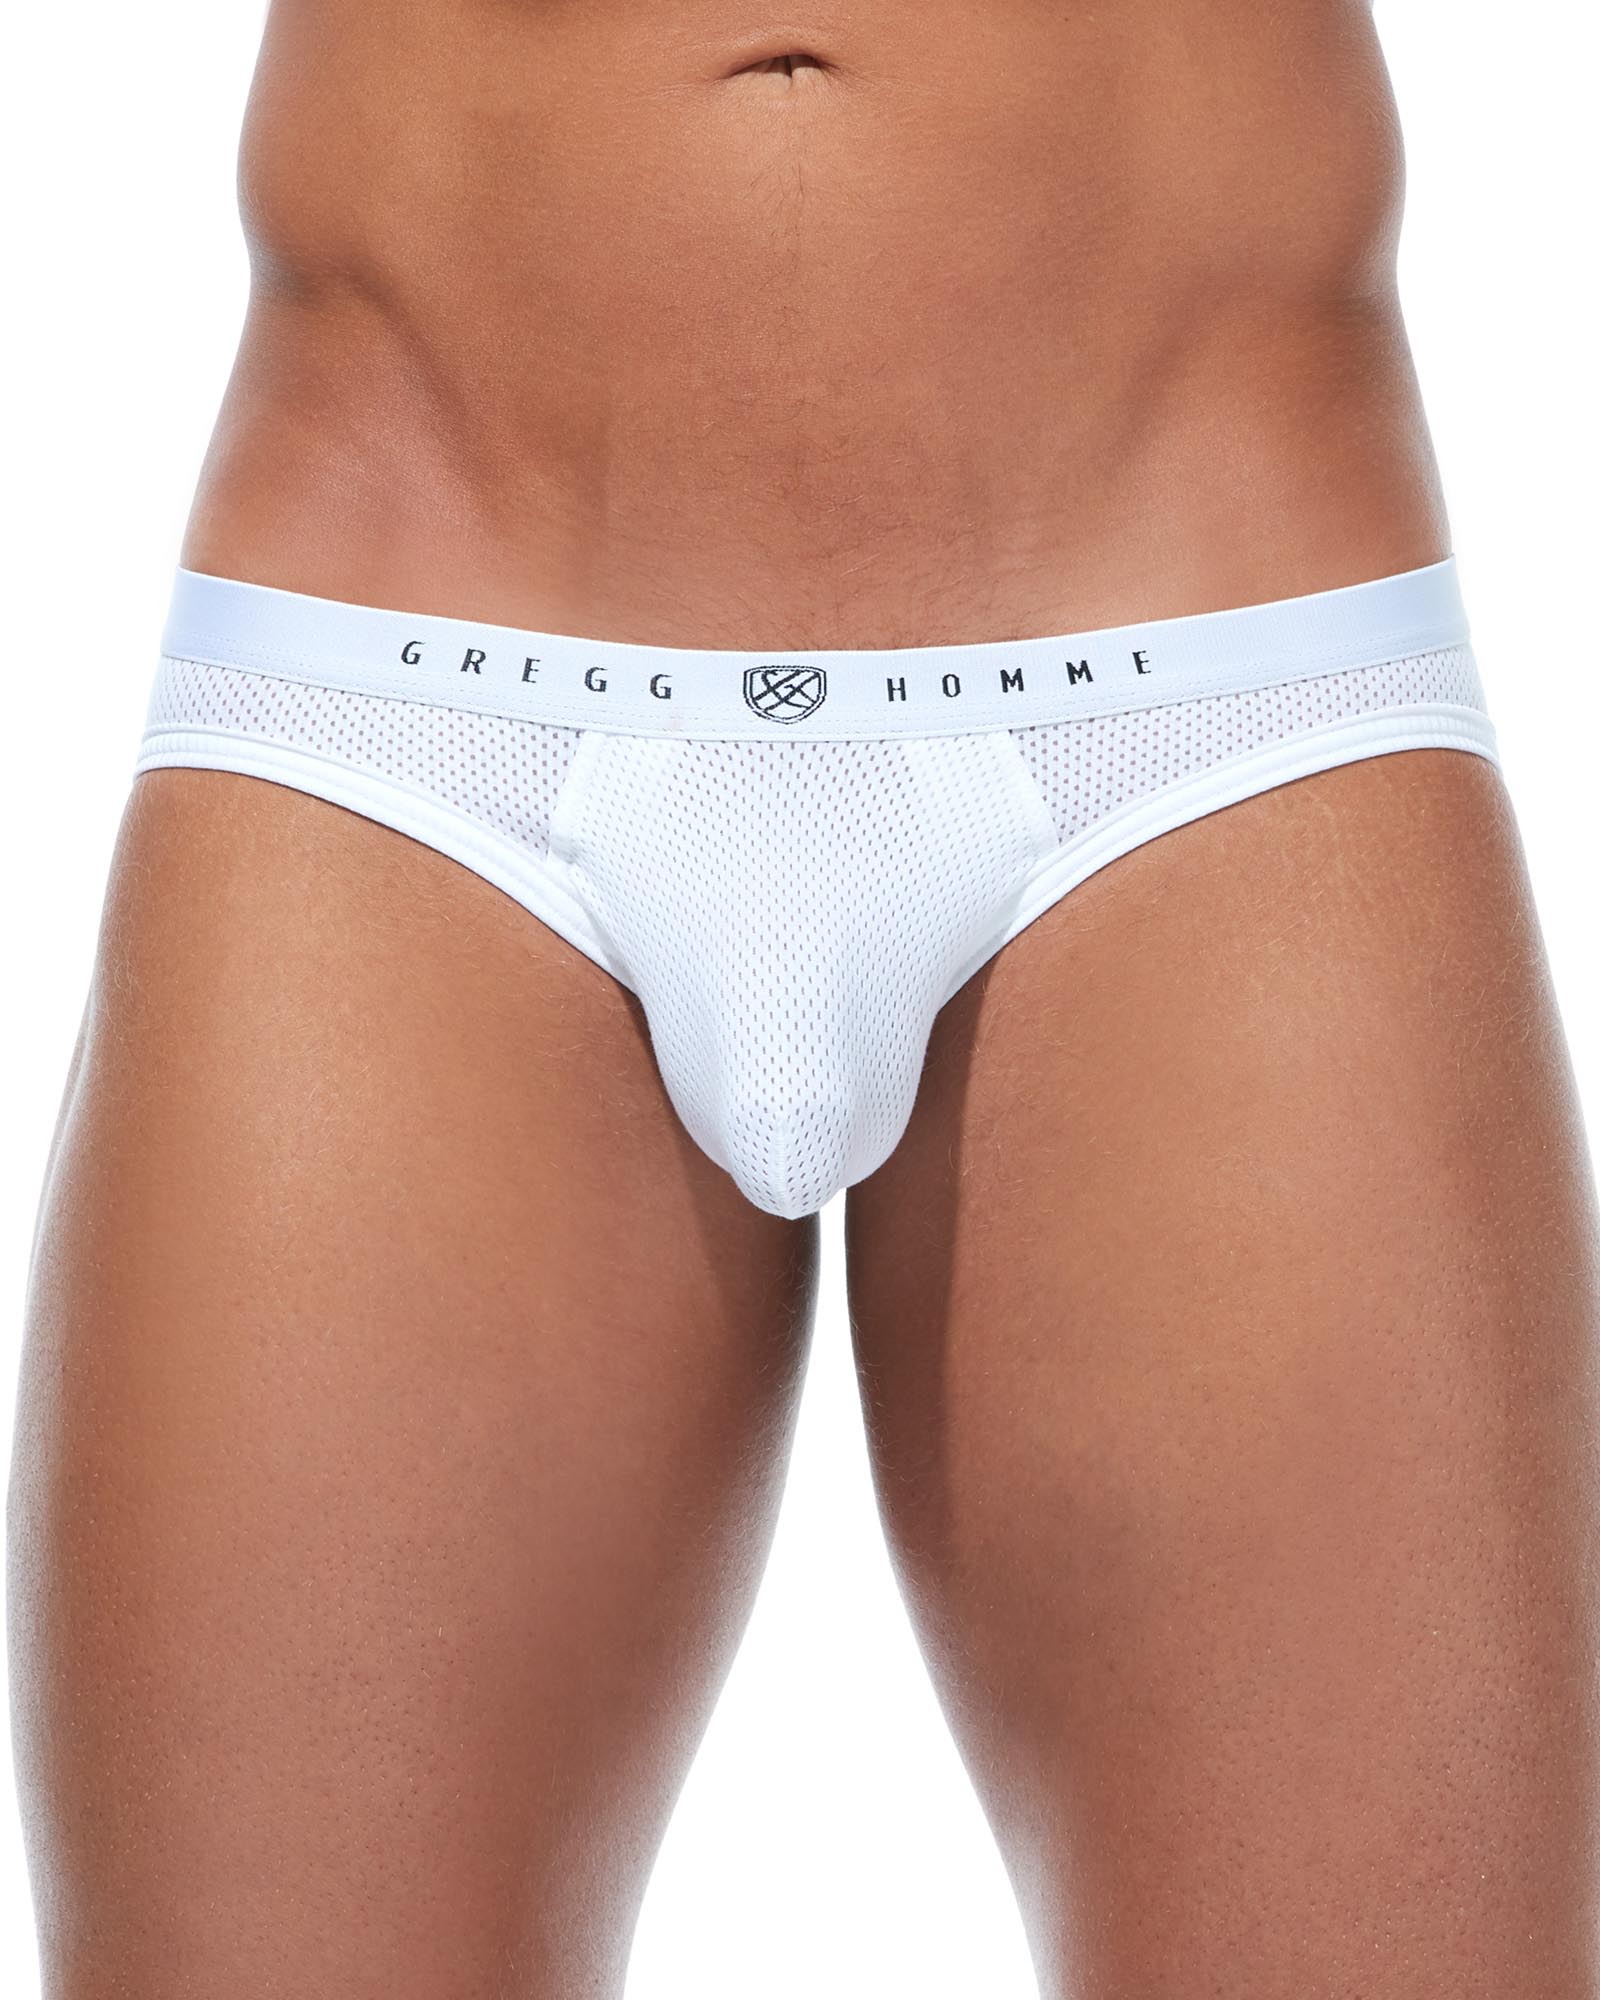  Gregg Homme Men's Room-Max Gym Brief - 190503 (Small